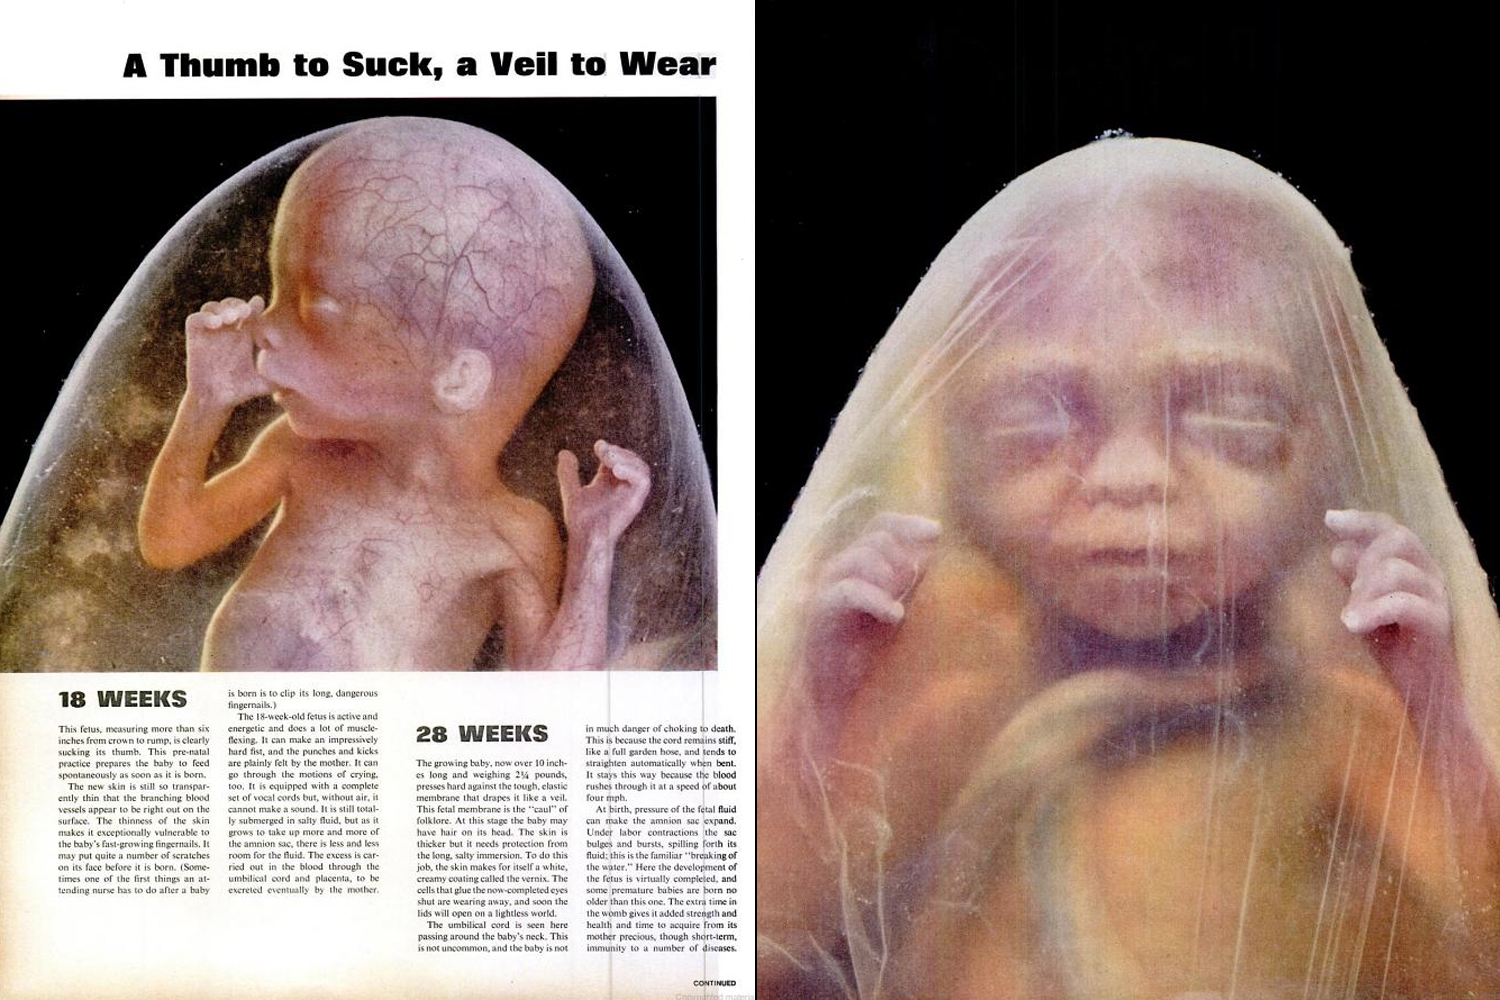 Page spreads from the Lennart Nilsson photo essay, "Drama of Life Before Birth," in the April 30, 1965, issue of LIFE magazine.